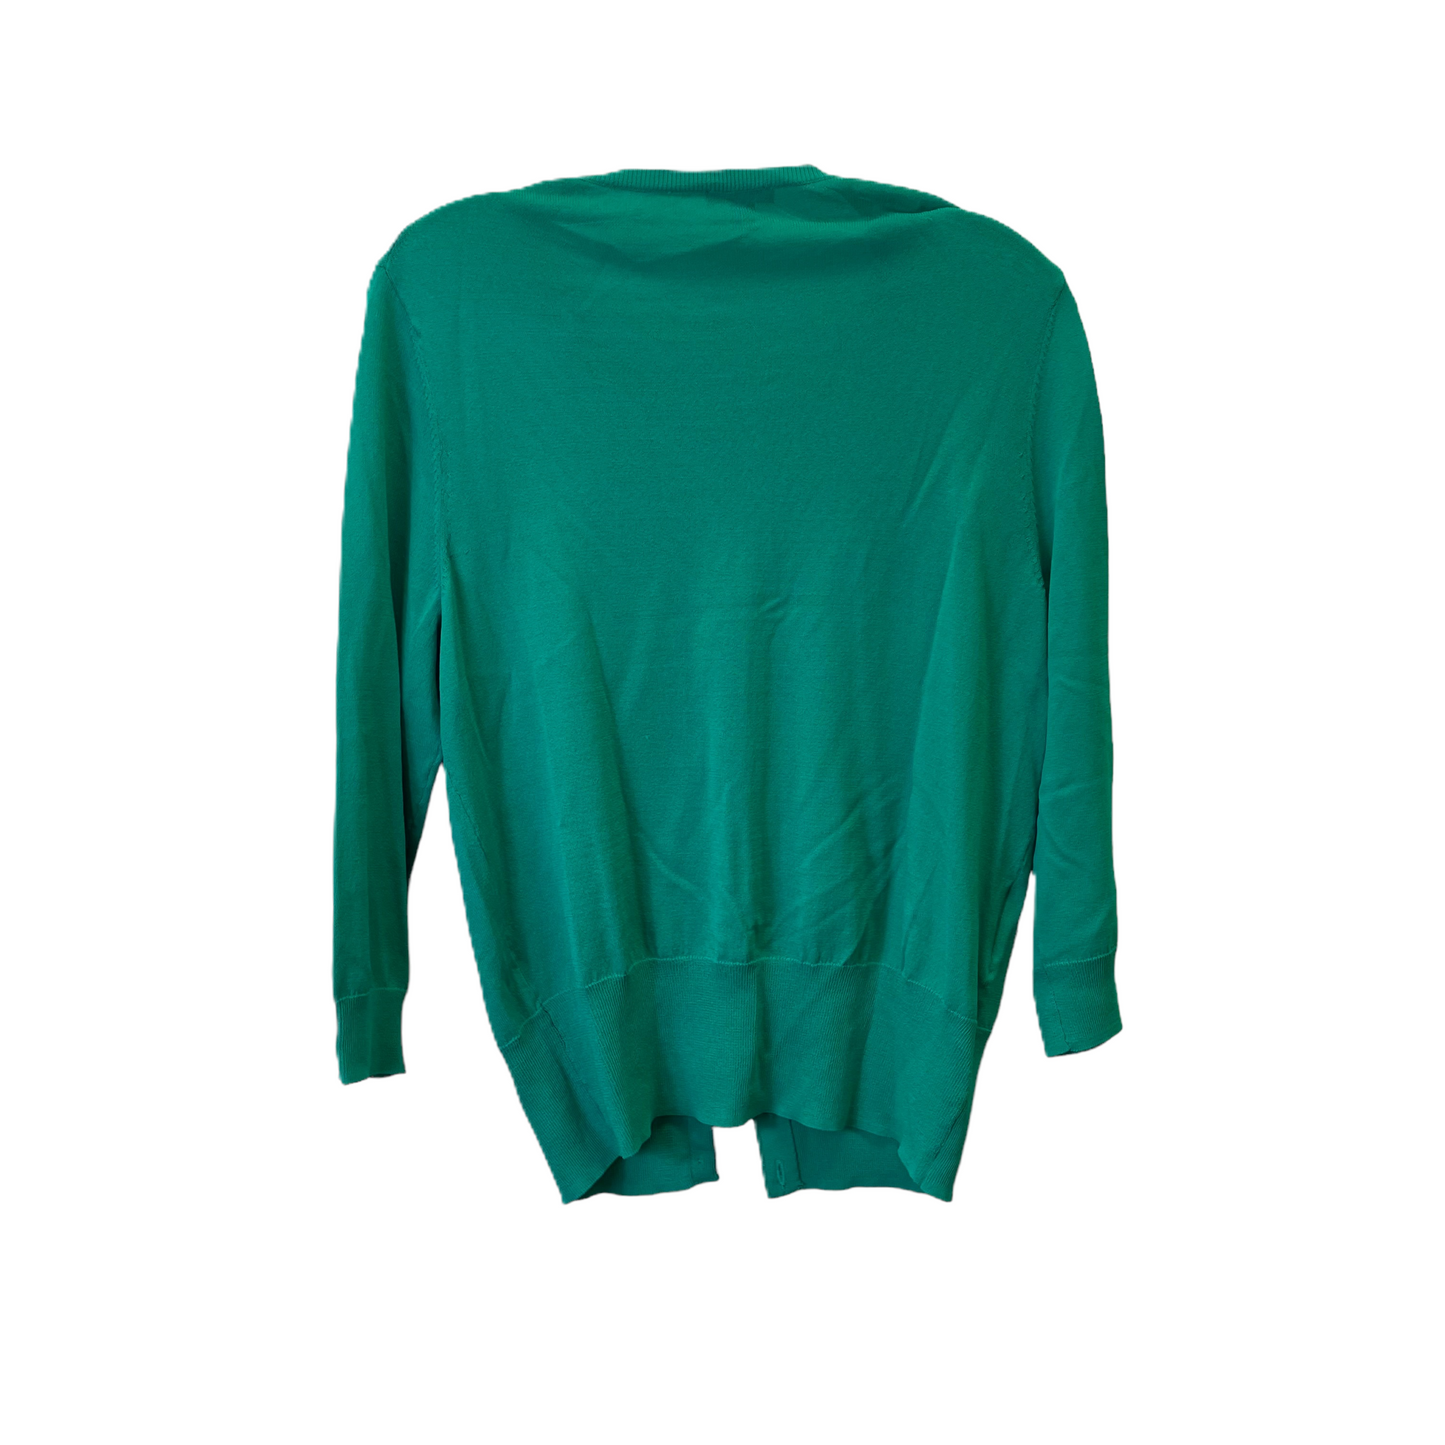 Green Sweater By Ann Taylor, Size: M